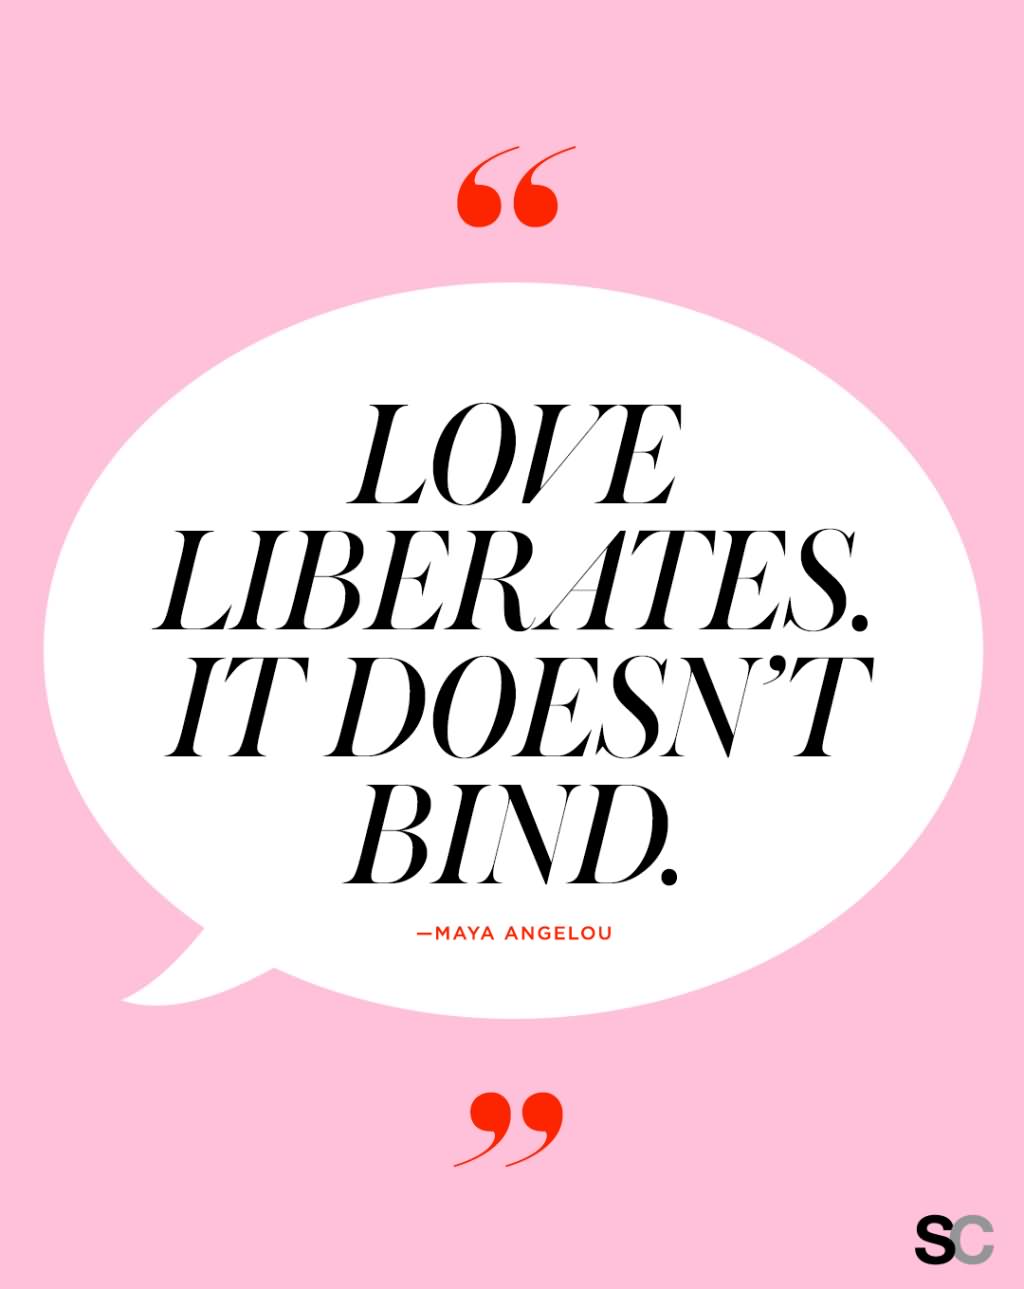 love liberates. it doesn’t blind.